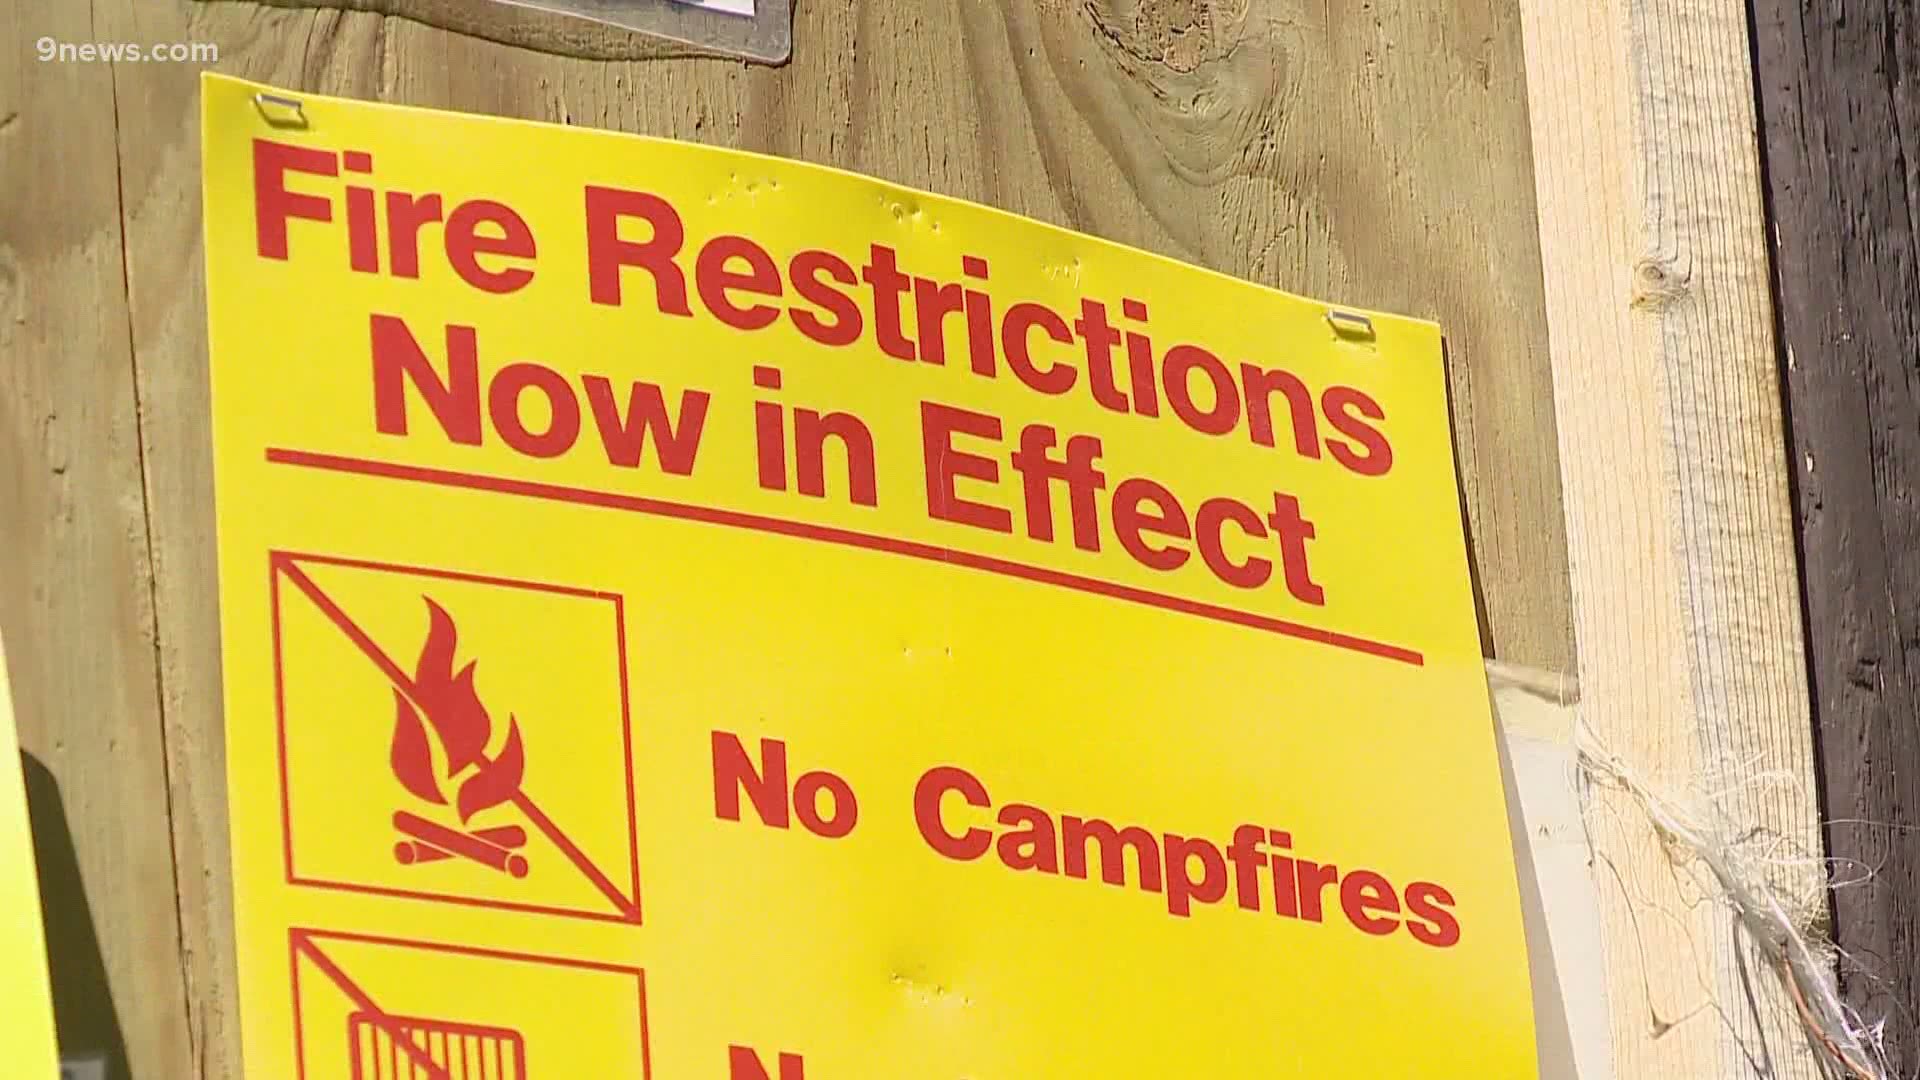 Open burning and fireworks are not allowed, however, things like camp stoves and backyard grills are.